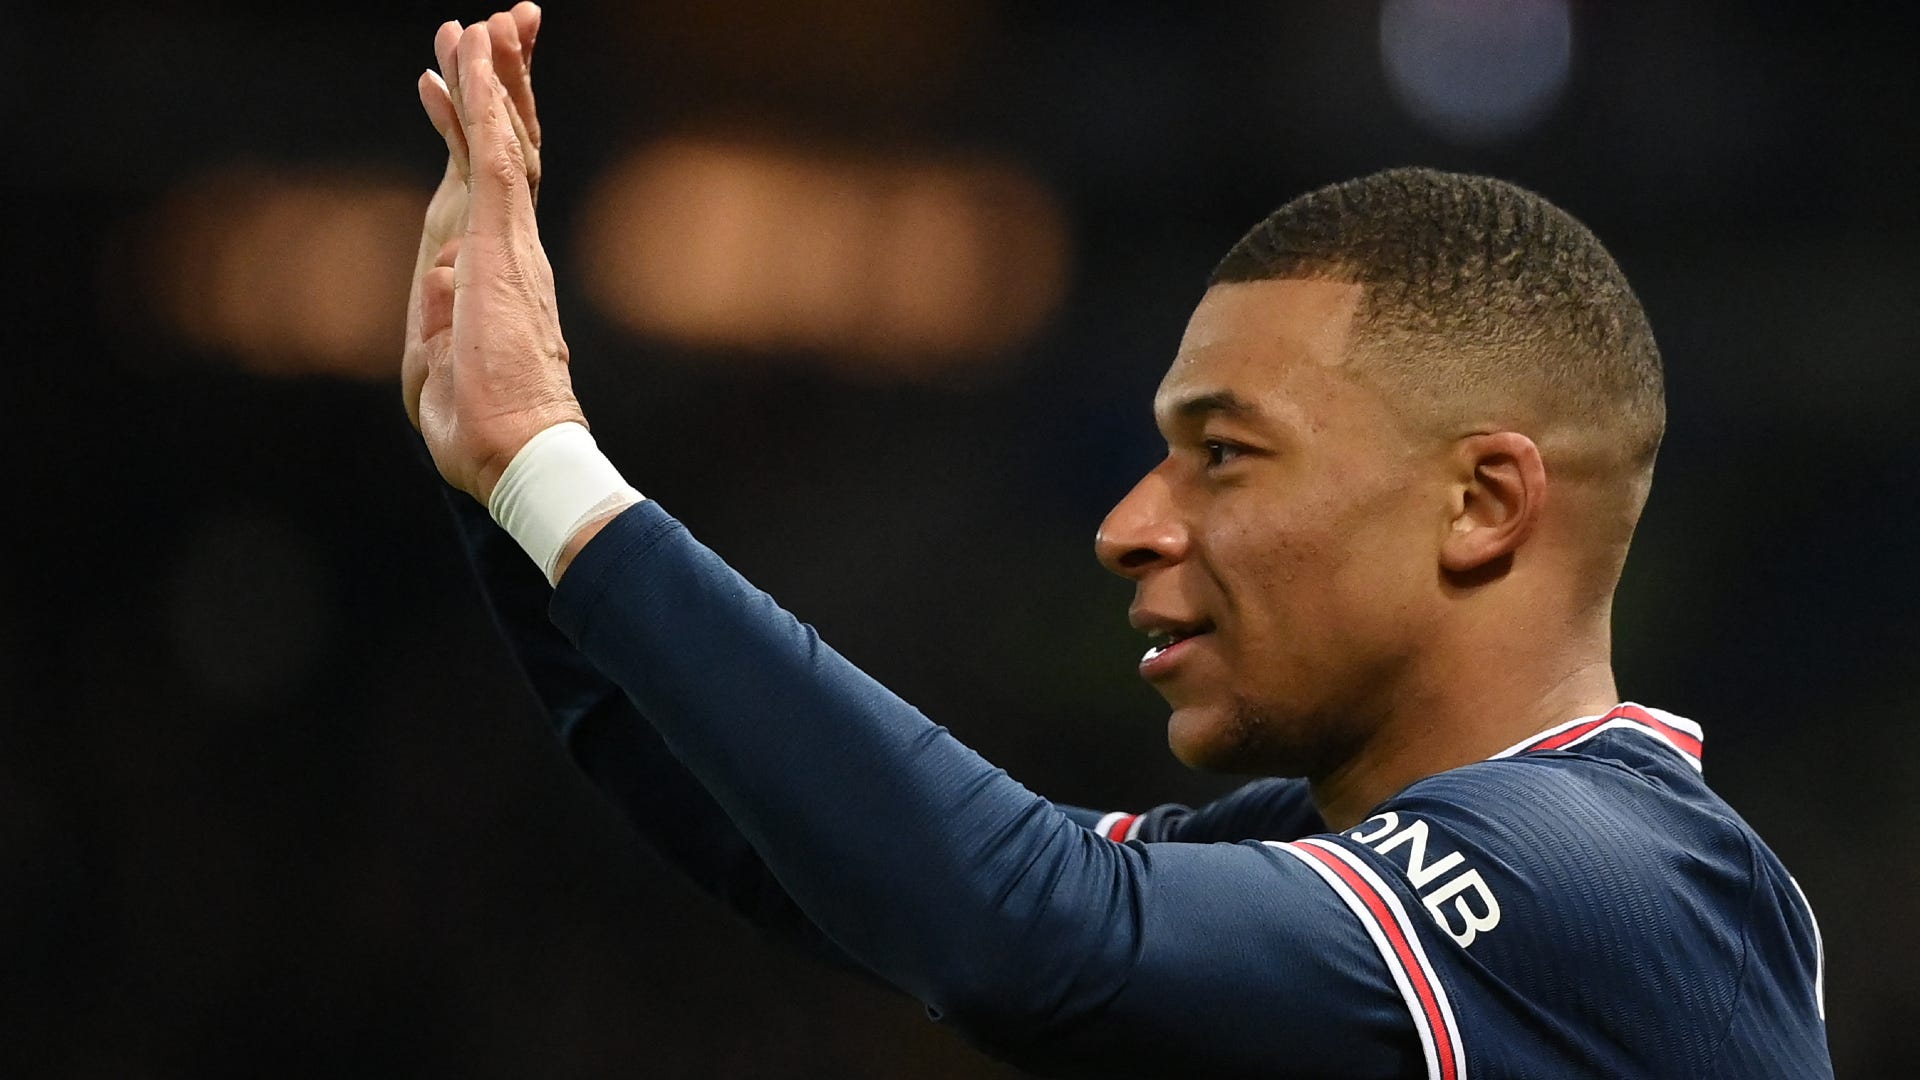 Watch: Mbappe gives interview in perfect Spanish to fire Real Madrid ...